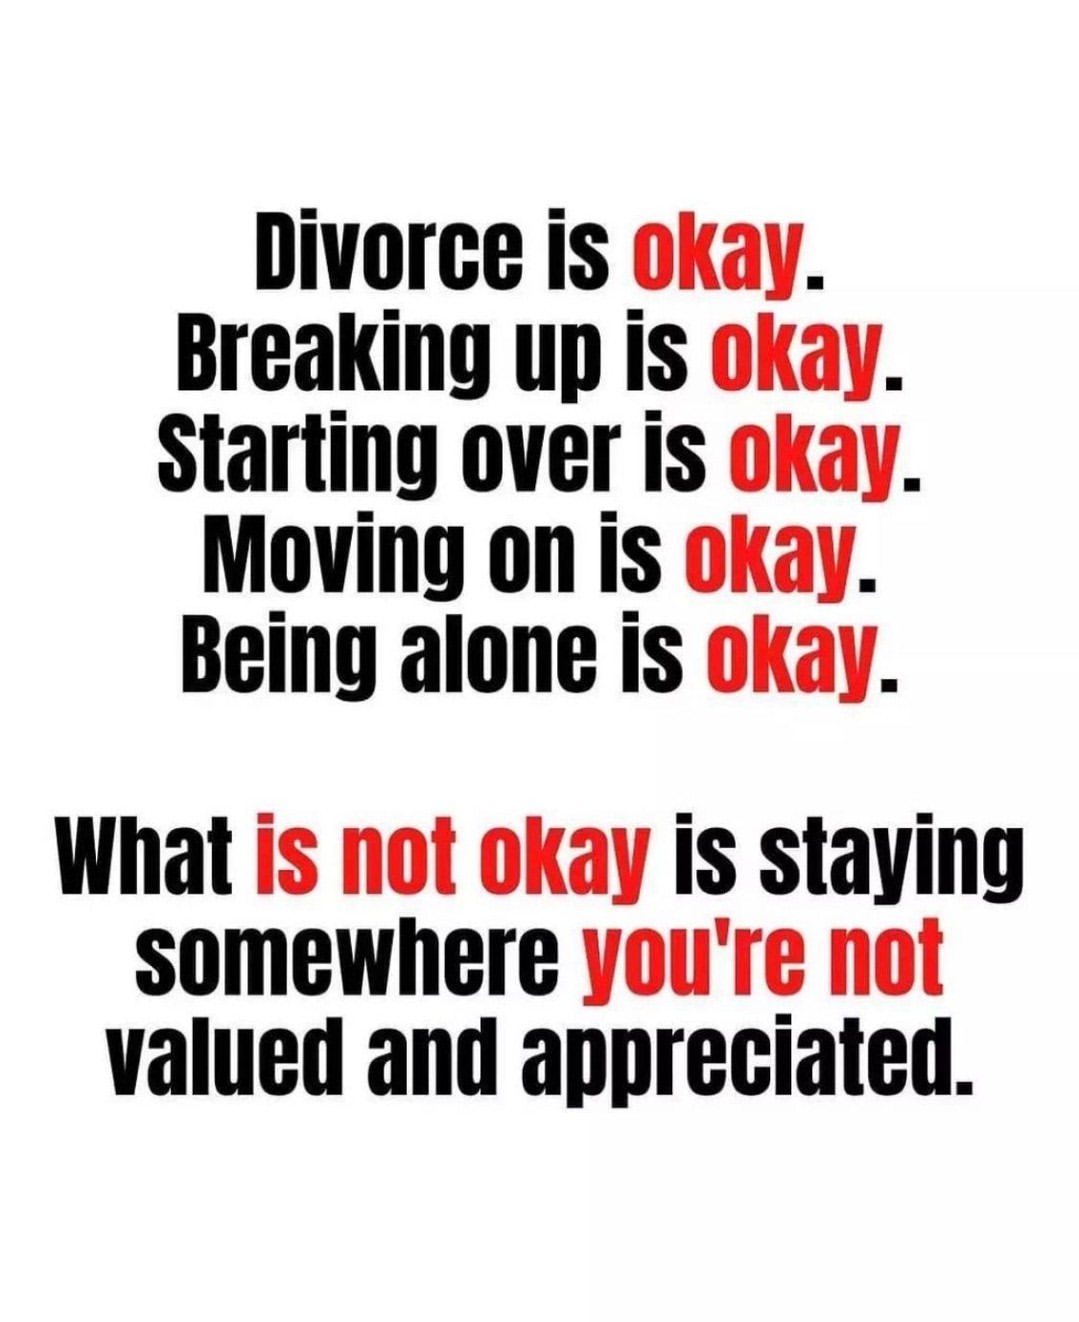 Divorce is okay. Breaking up is okay. Starting over is okay. Moving on is  okay. Being alone is okay. What is not okay is staying somewhere you're not  valued and appreciated. -